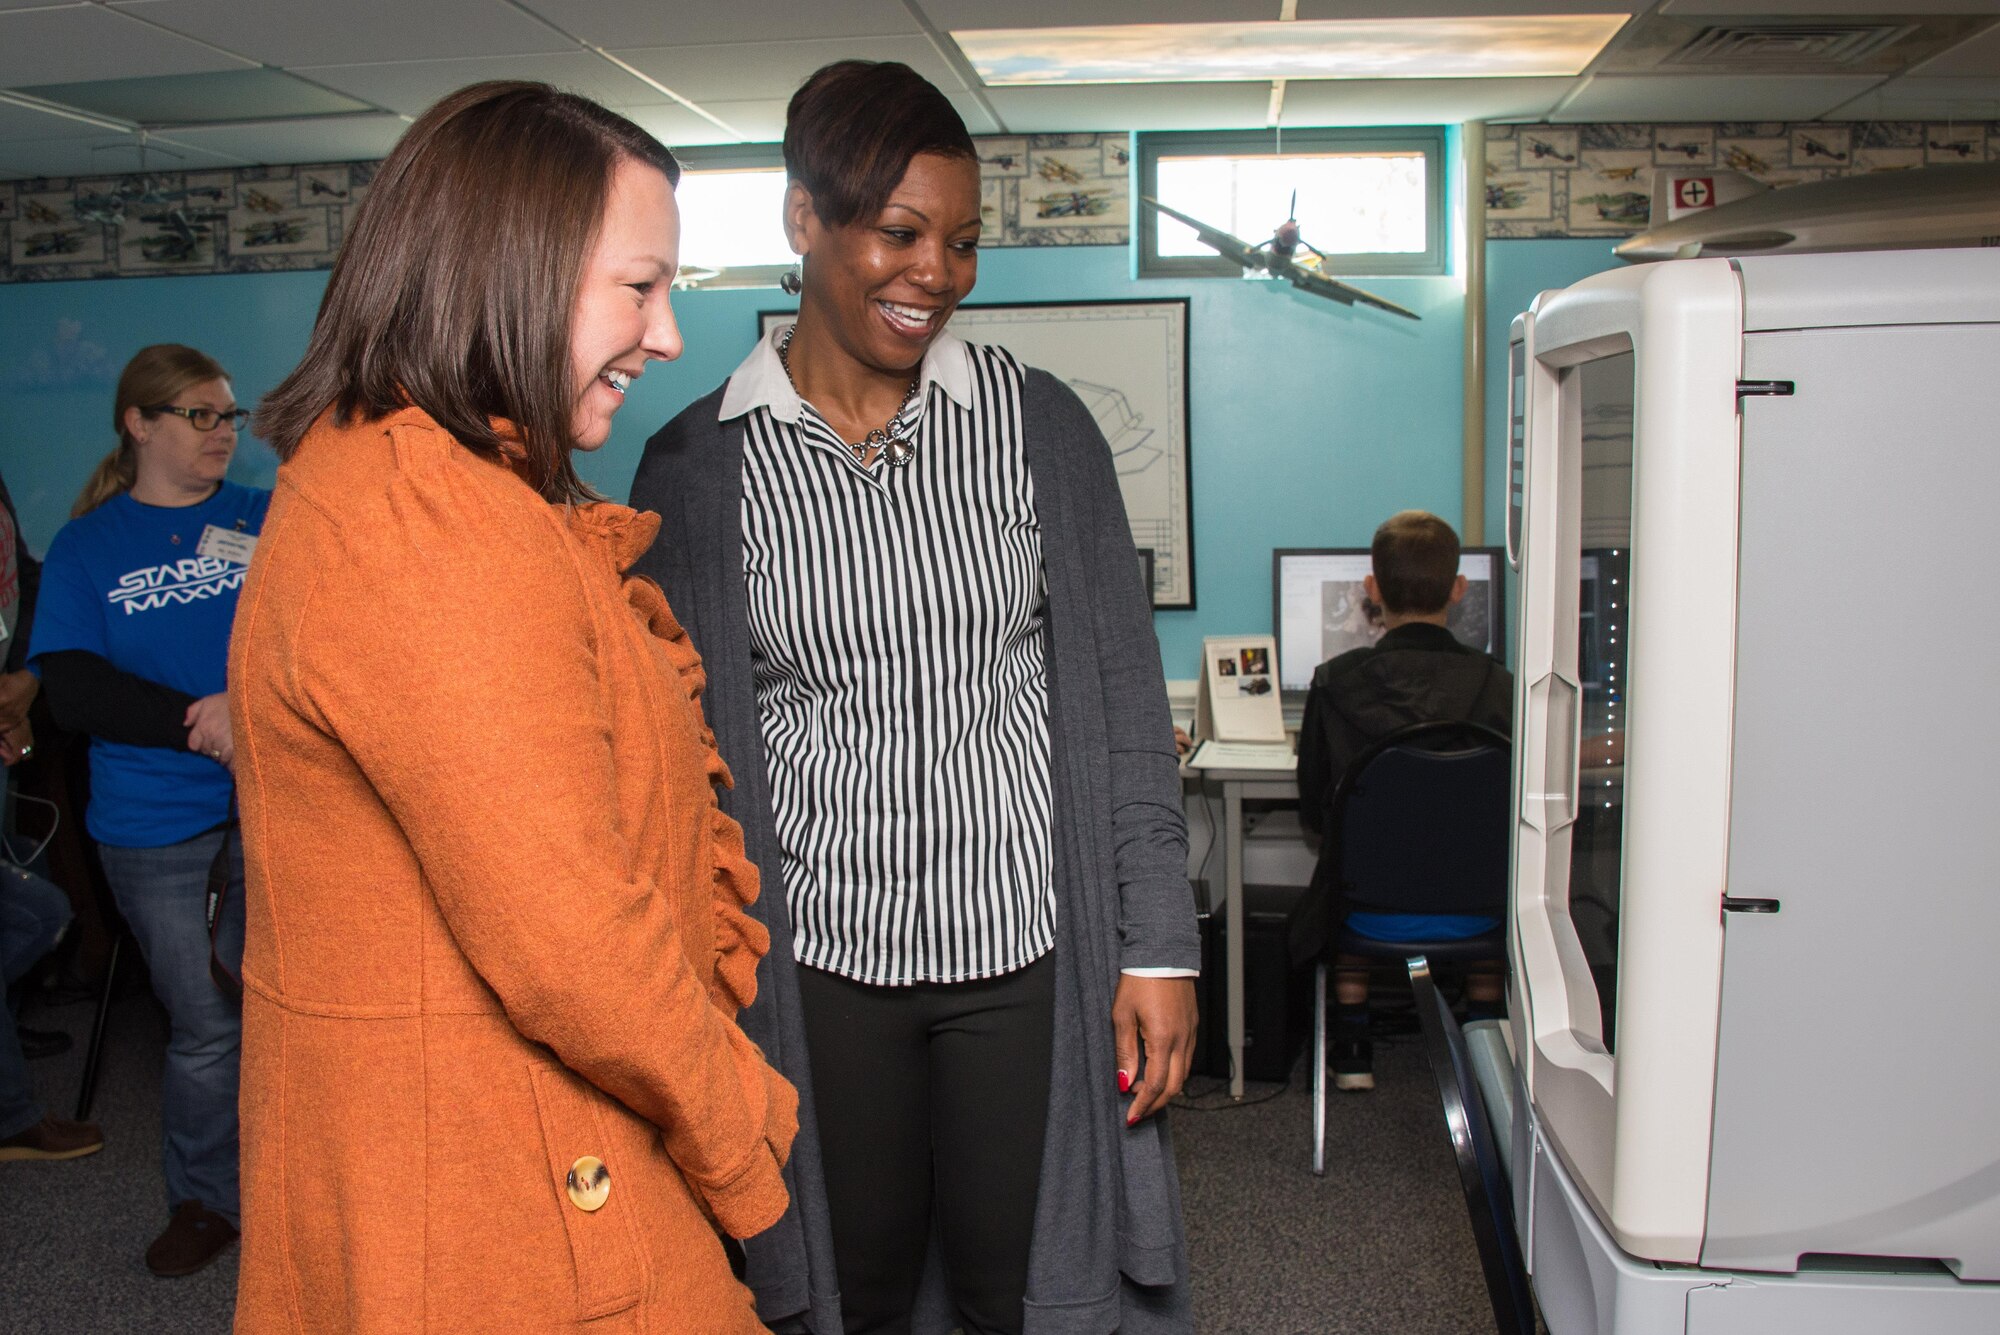 Congresswoman Martha Roby, U.S. Representative for Alabama’s Second Congressional District, left, watches as Princess Cuthrell, Department of Defense STARBASE Maxwell director, demonstrates how a 3D printer works during her first visit to STARBASE Maxwell, Nov. 27, 2017, Maxwell Air Force Base, Ala. STARBASE Maxwell is one of 59 educational awareness and outreach programs across the country. STARBASE Maxwell has served approximately 1,900 students this year from Montgomery, Autauga and Elmore counties in the state. The reason for Roby’s visit was for her to become familiarized with the program and learn what it has to offer to the local community. (U.S. Air Force photo by Melanie Rodgers Cox/ Released.)